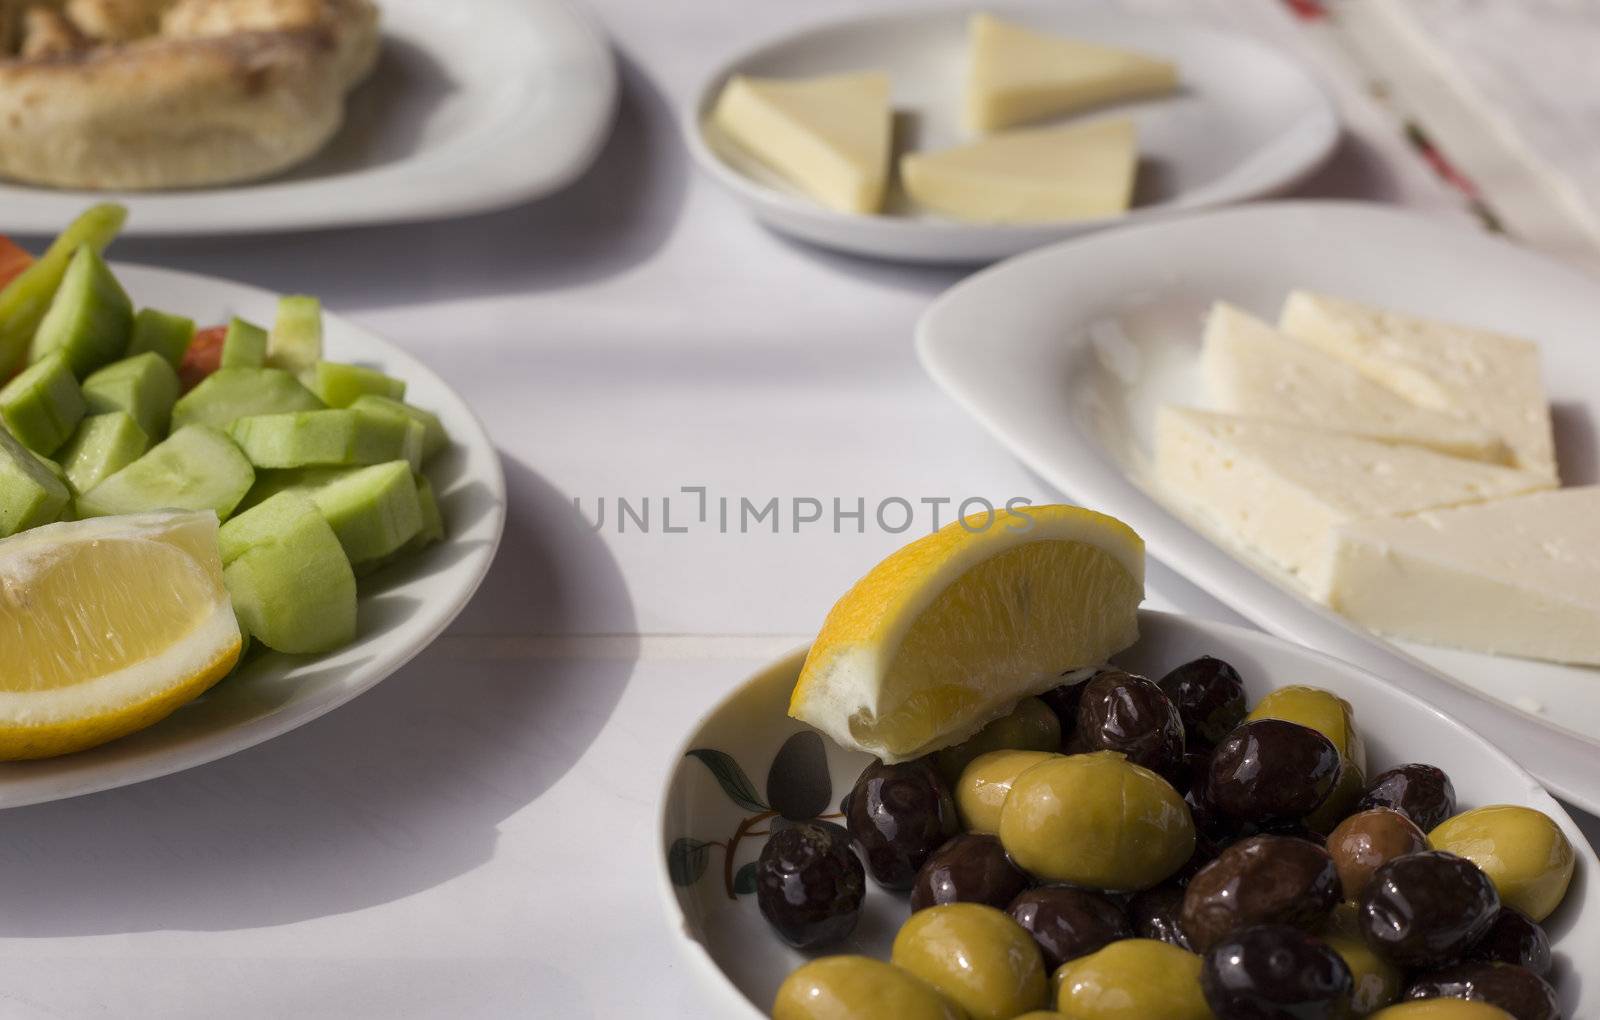 close up to classic Turkish style breakfast food plates